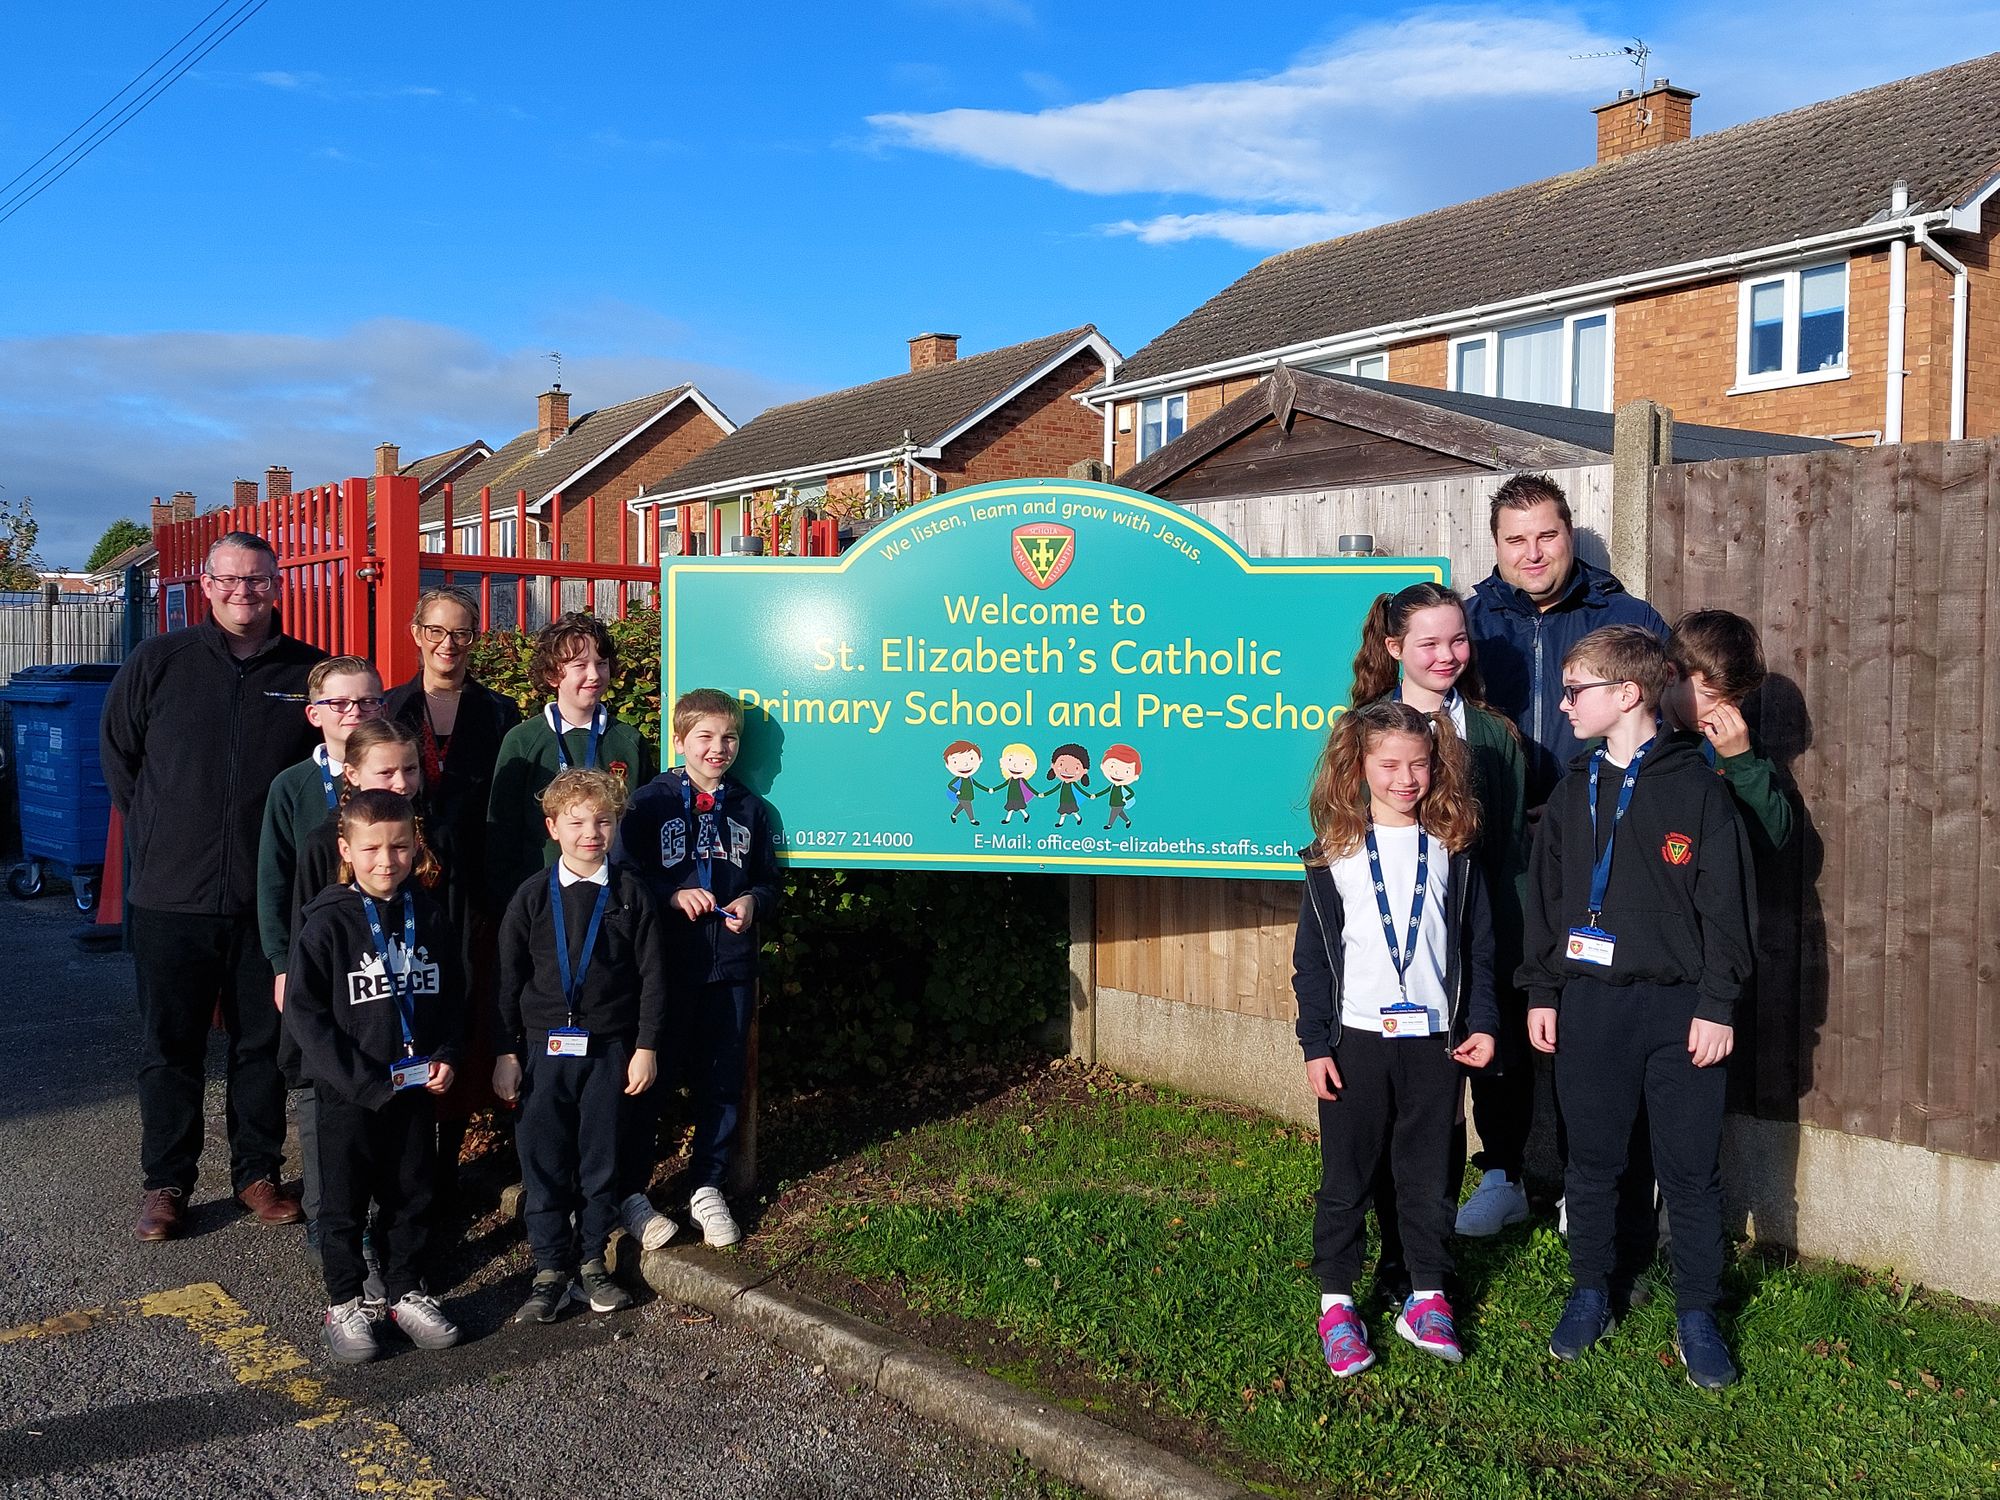 Central England Co-op Supports Tamworth School To Promote Wellbeing Champions